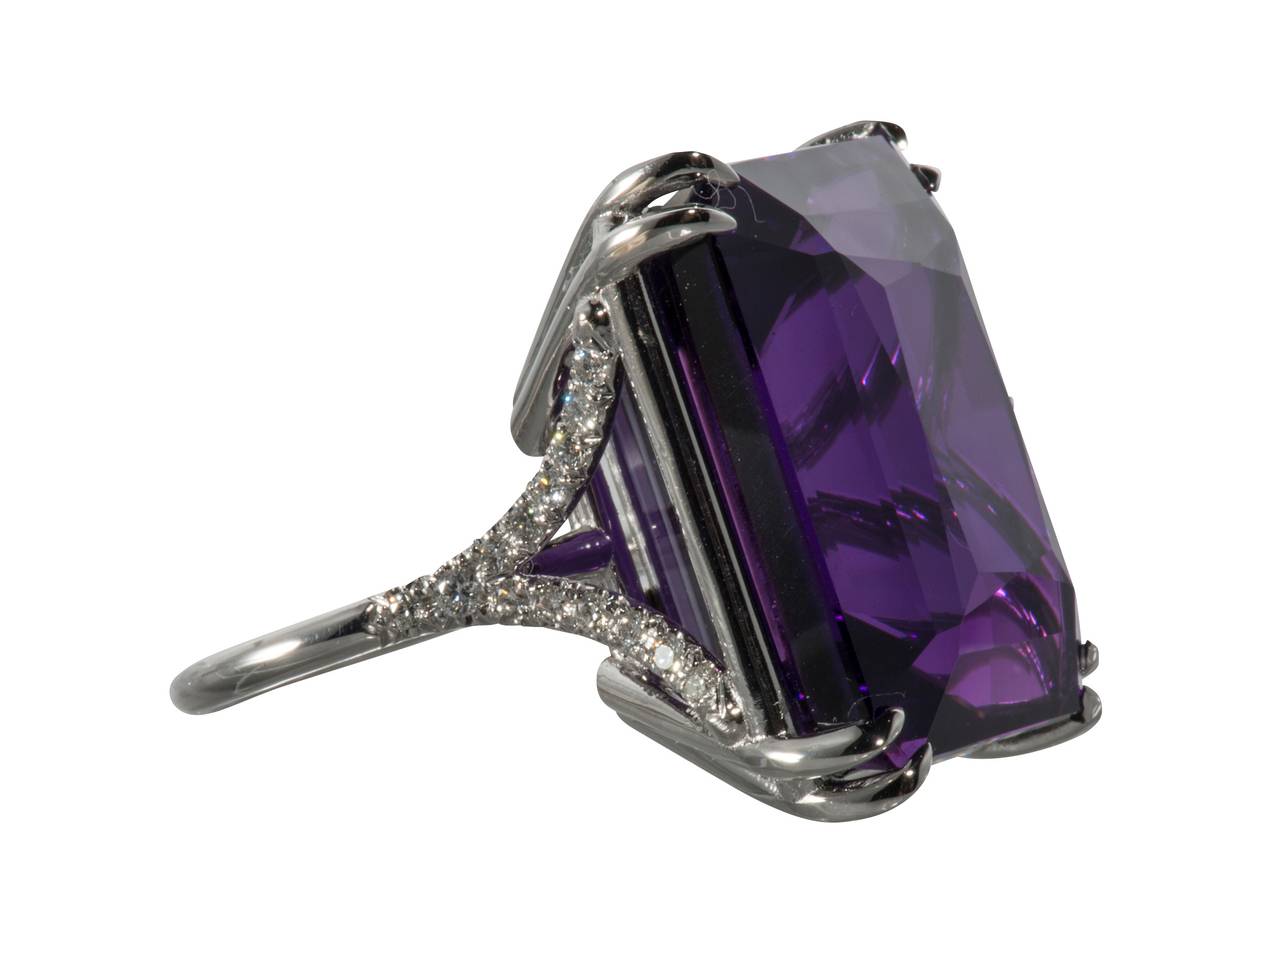 Stunning new cocktail ring made by Wayne Smith Jewels. The amethyst is approximately 60cts. and the diamonds approximately .80cts.